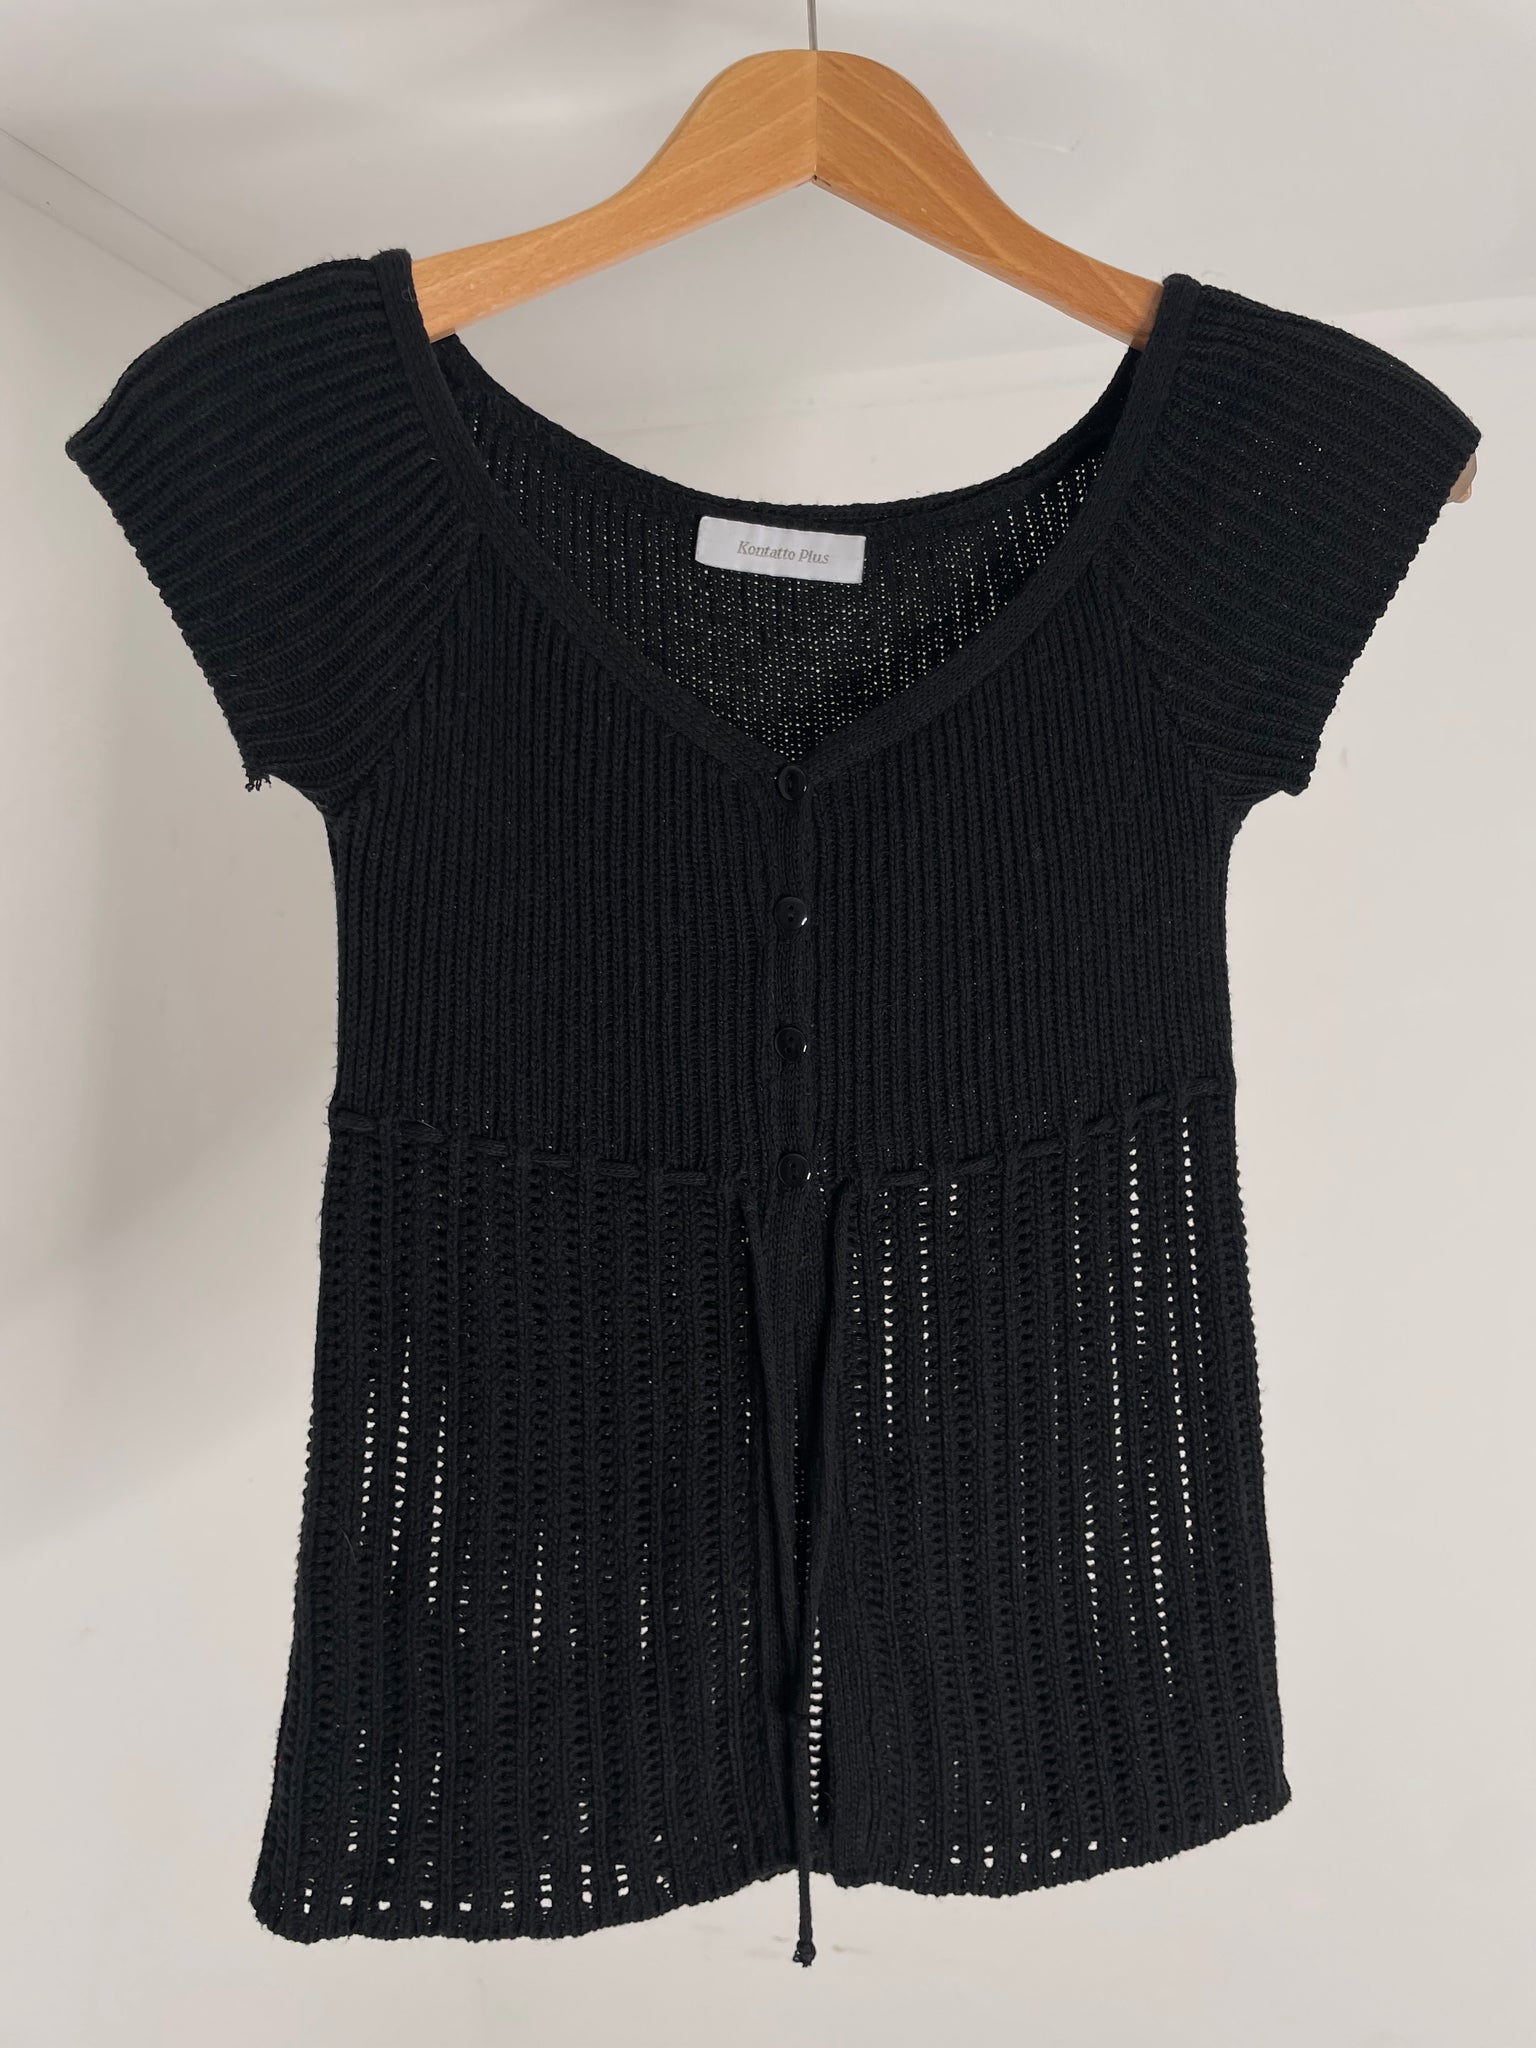 Woven Sweater Top S